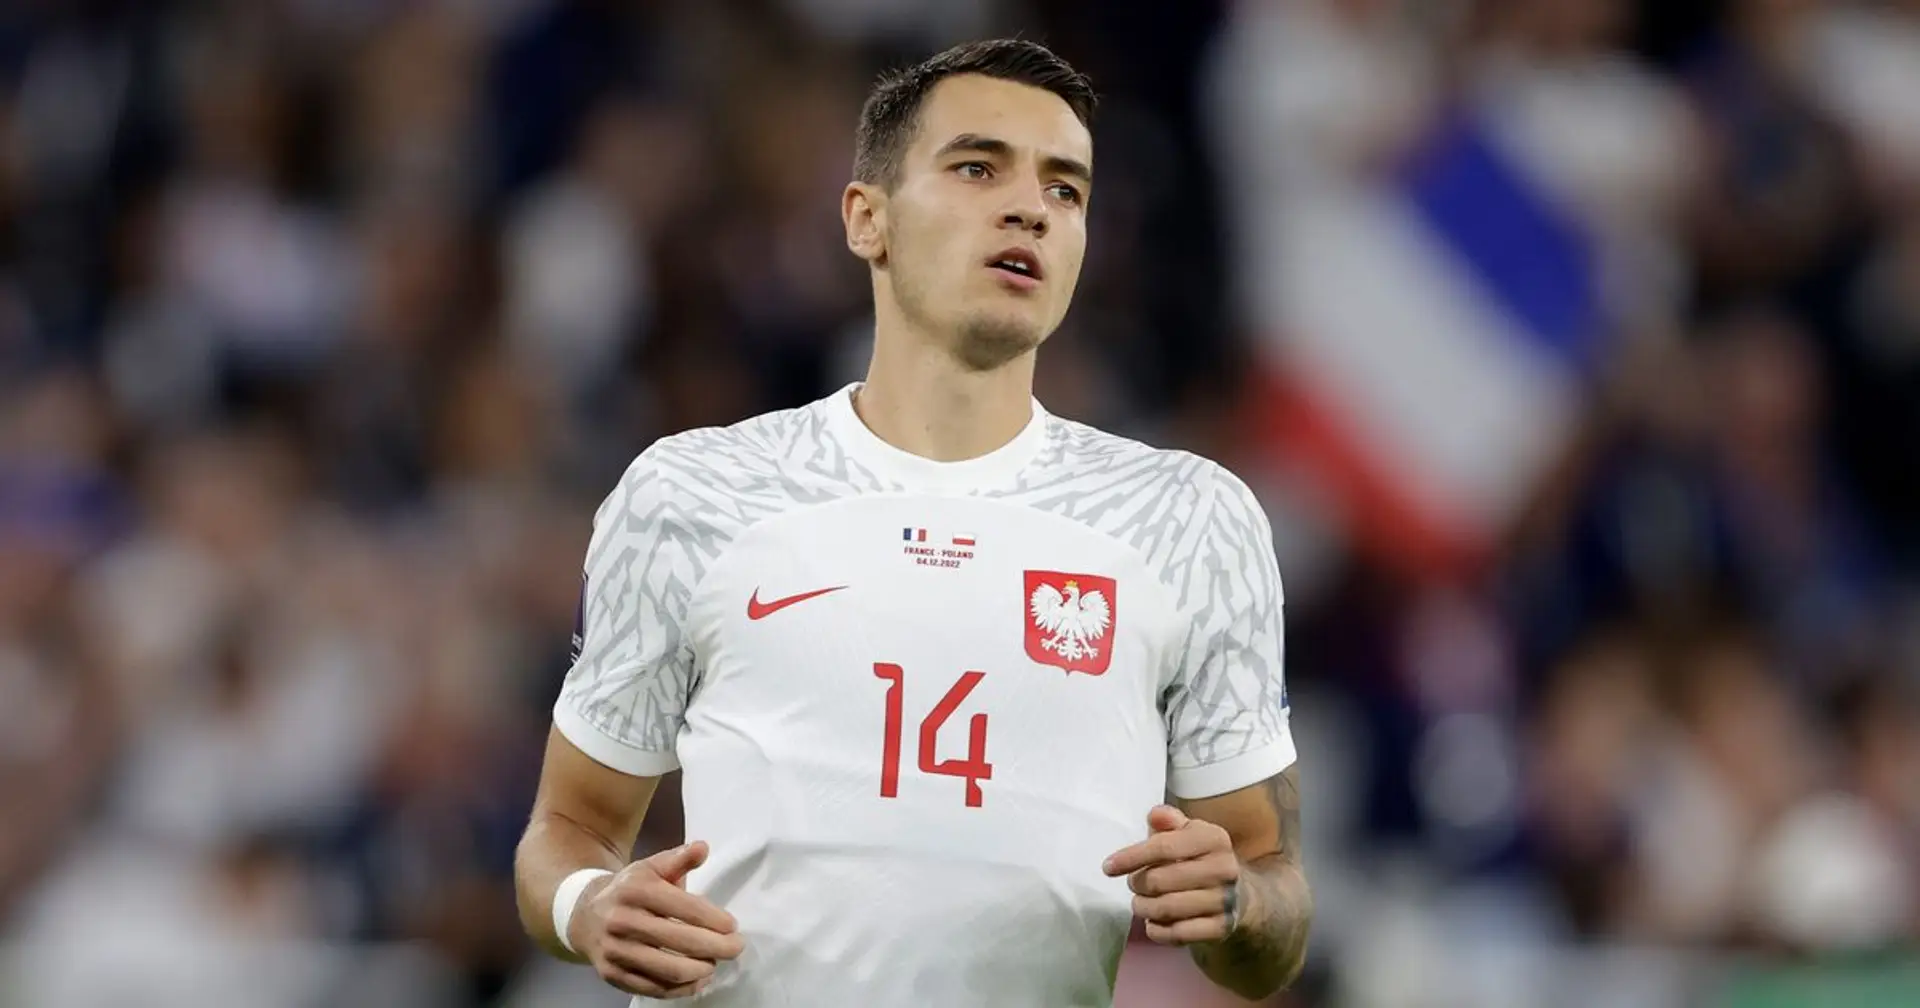 Evening Standard: Jakub Kiwior deal to be completed 'in next 24 hours', transfer fee revealed (reliability: 4 stars)